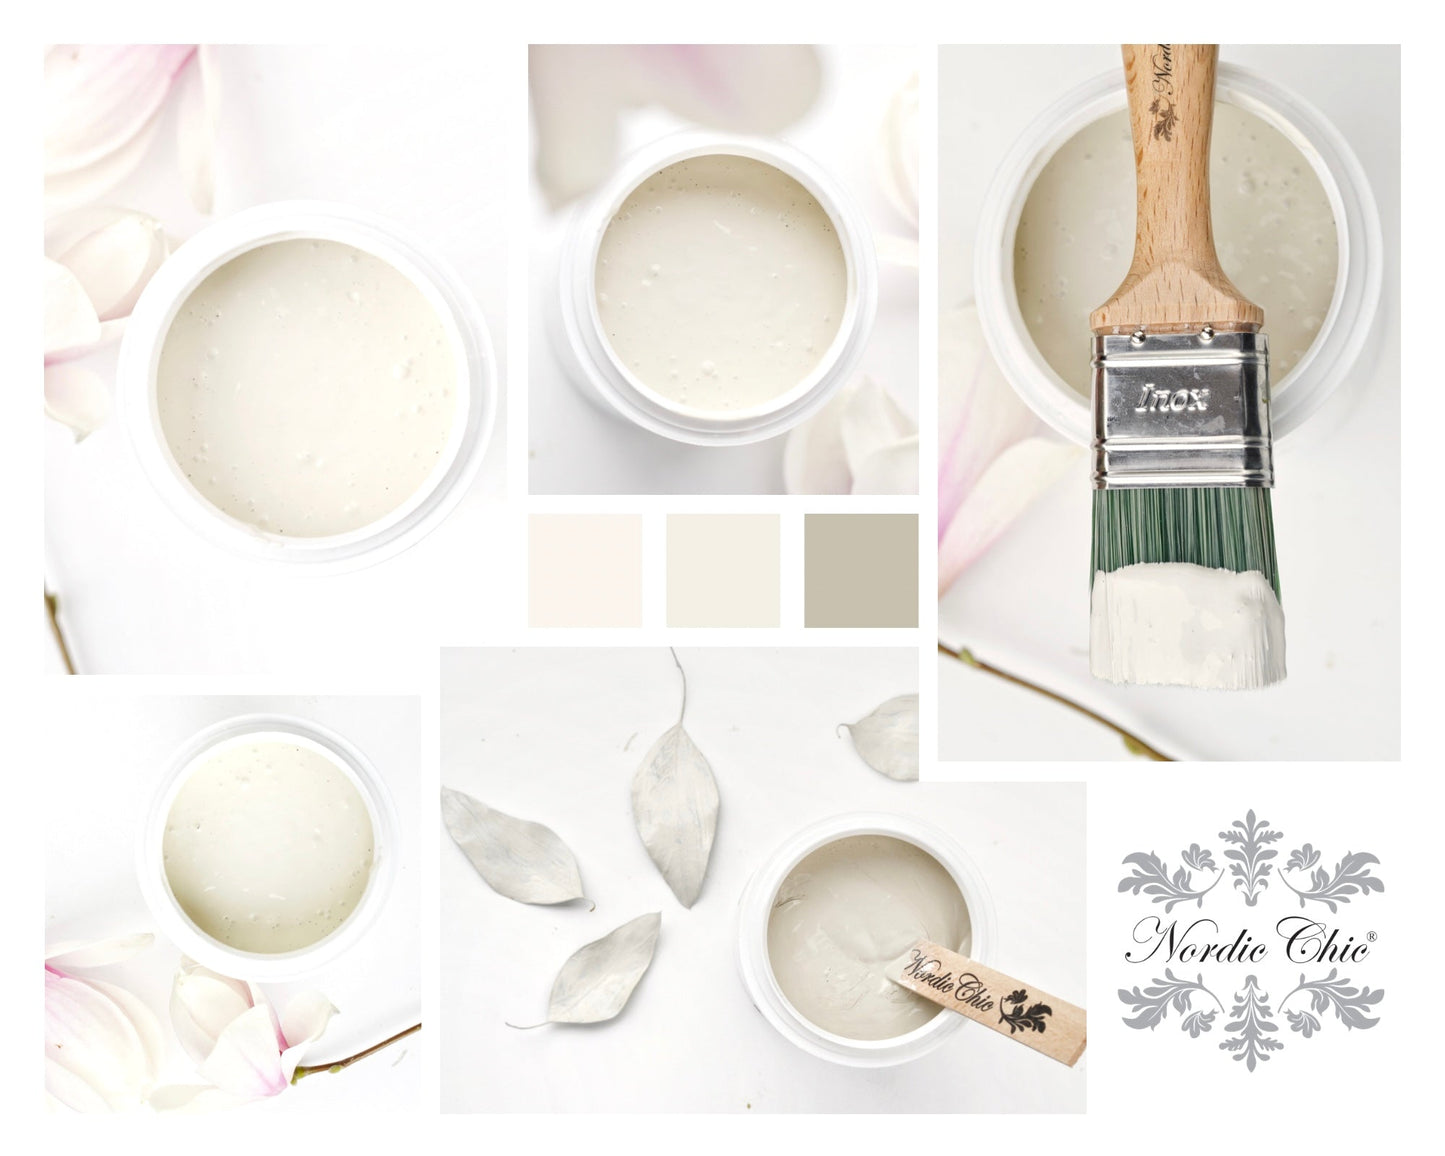 Nordic Chic Furniture Paint - Champagne - Nordic Chic®